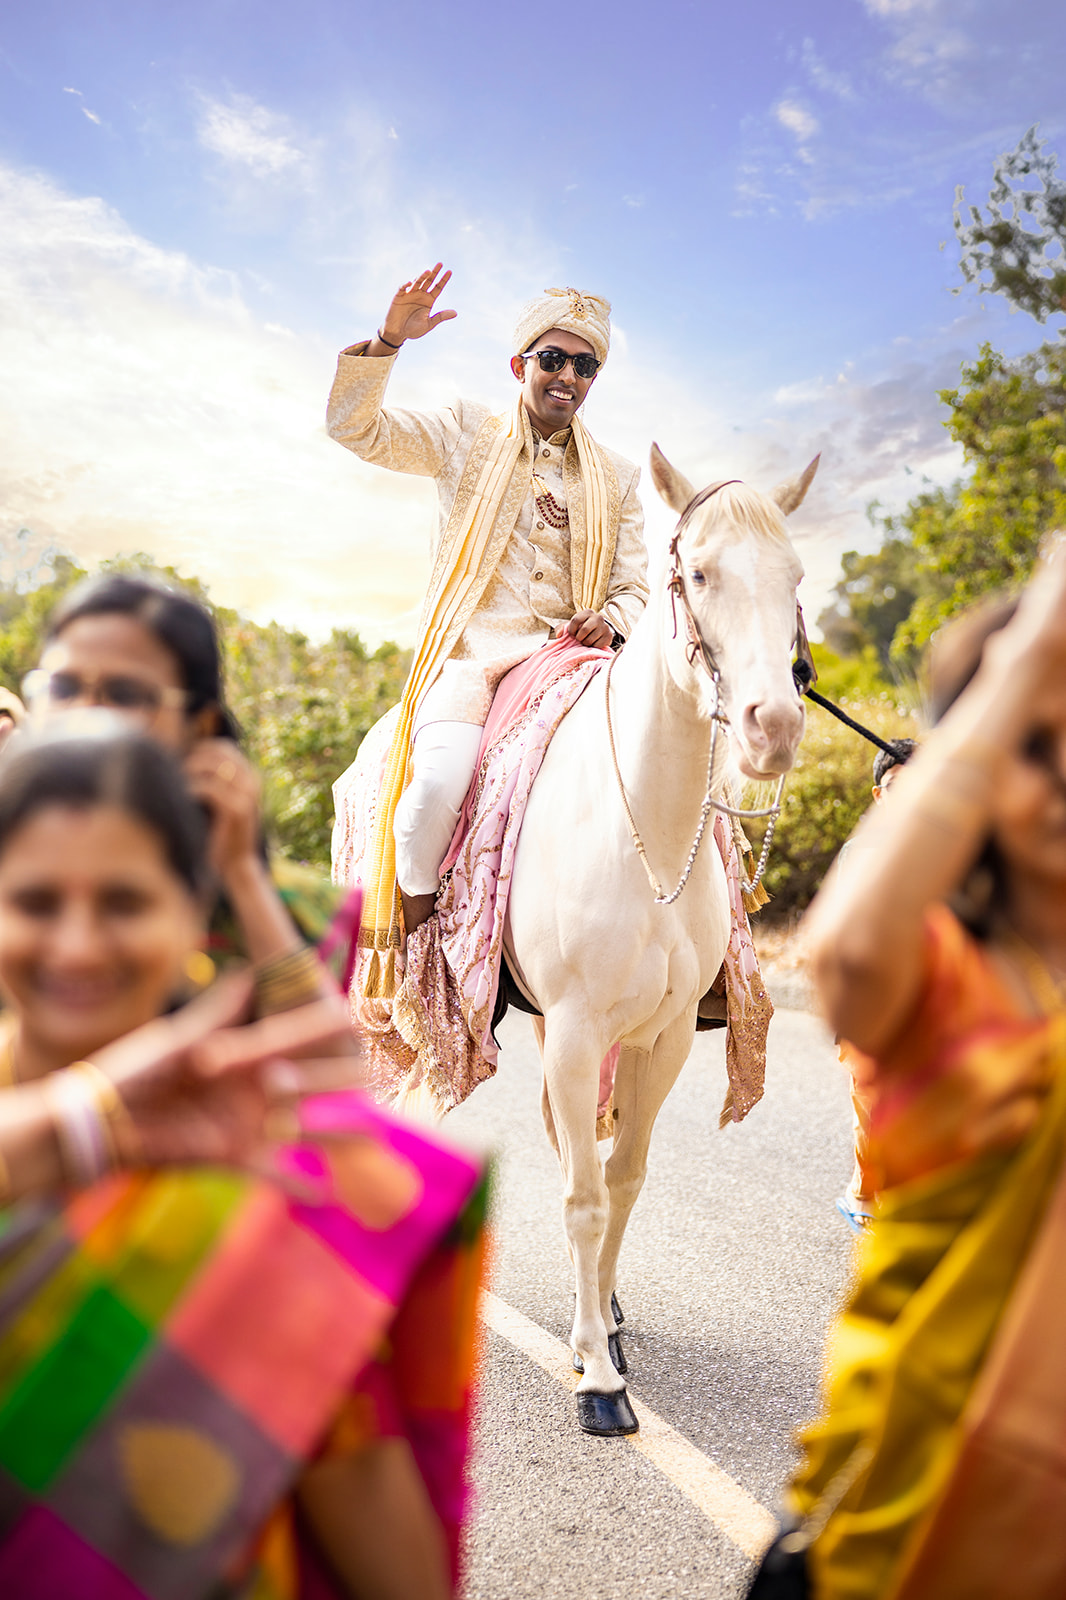 Indian groom waives to onlookers and family in the bay area at his wedding while on top of a horse.